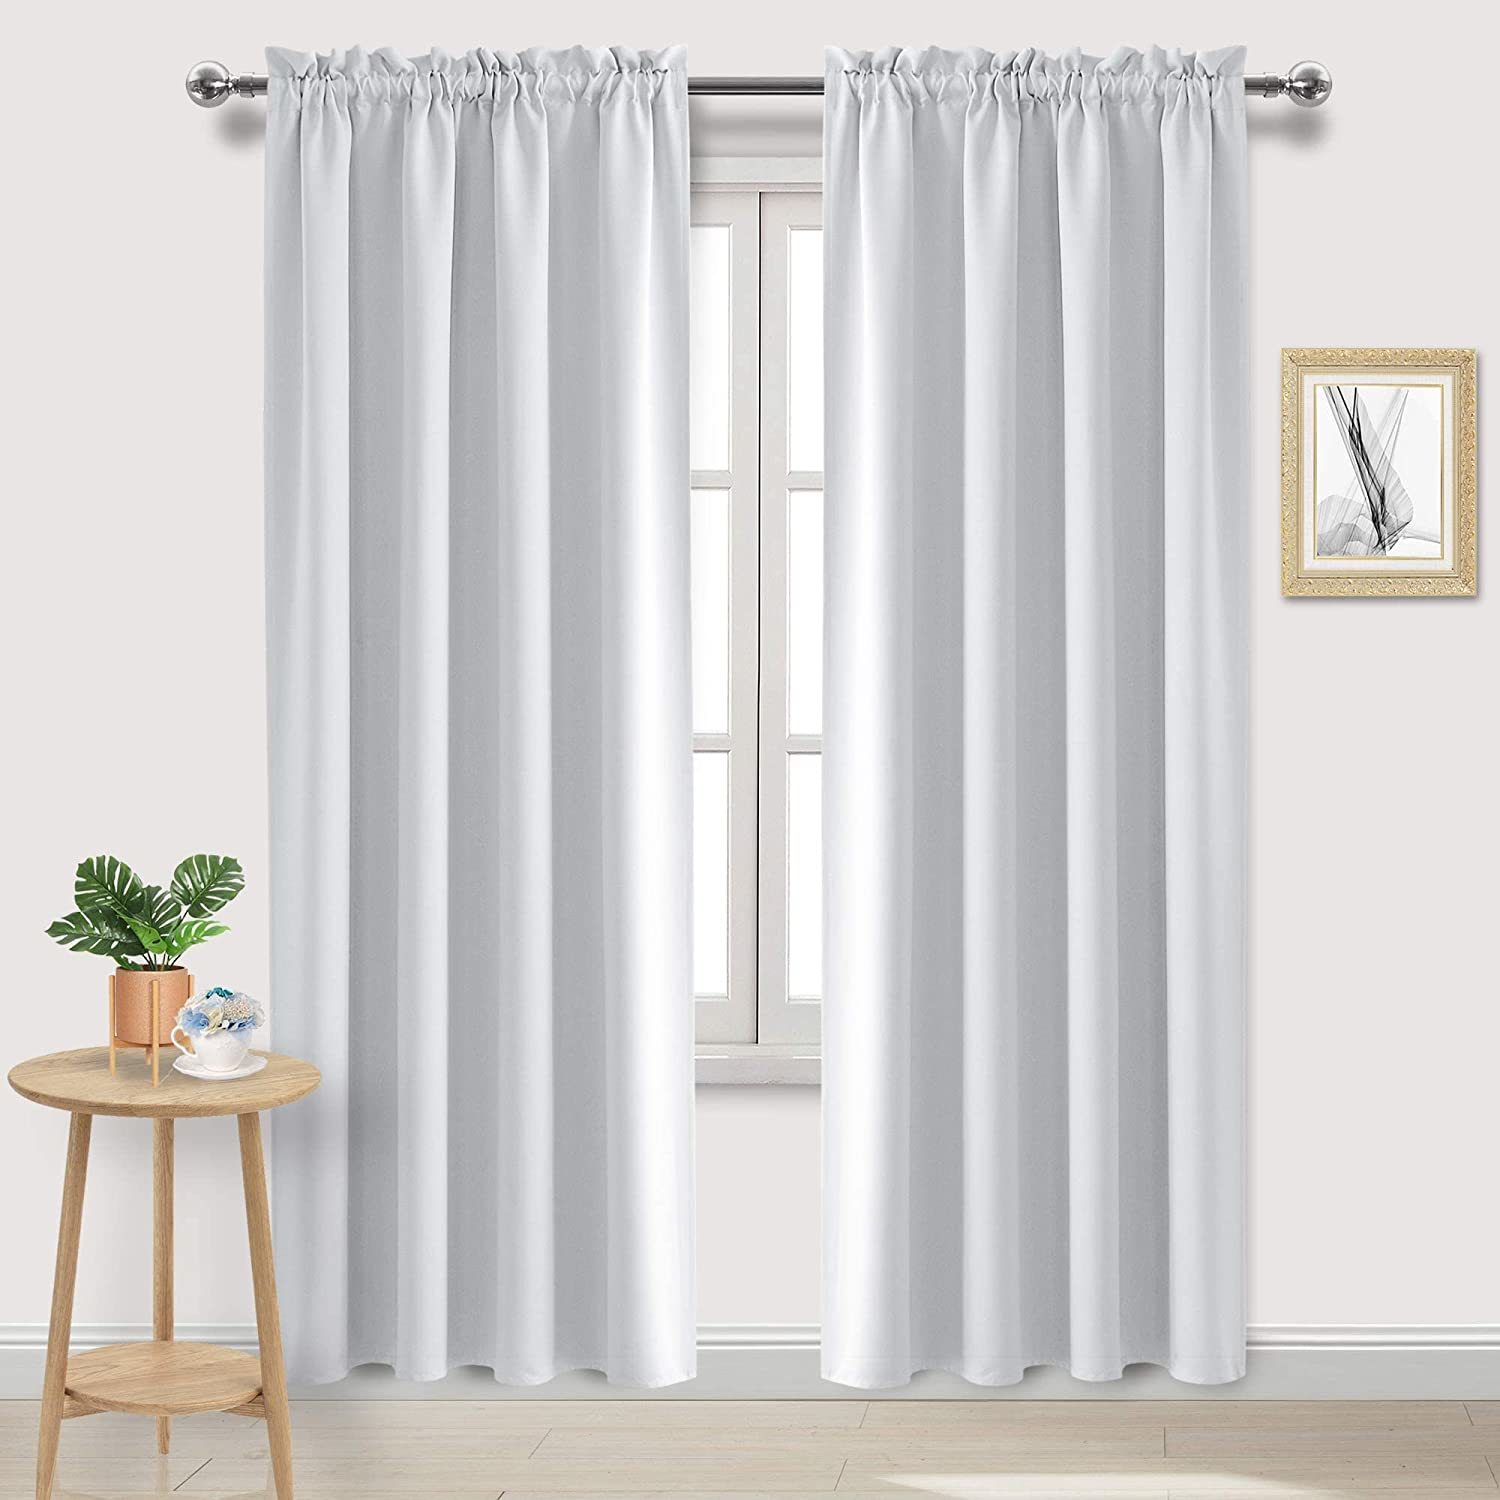 Primary image for Dwcn White Room Darkening Curtains For Bedroom, 60 X 84 Inches Long - Energy